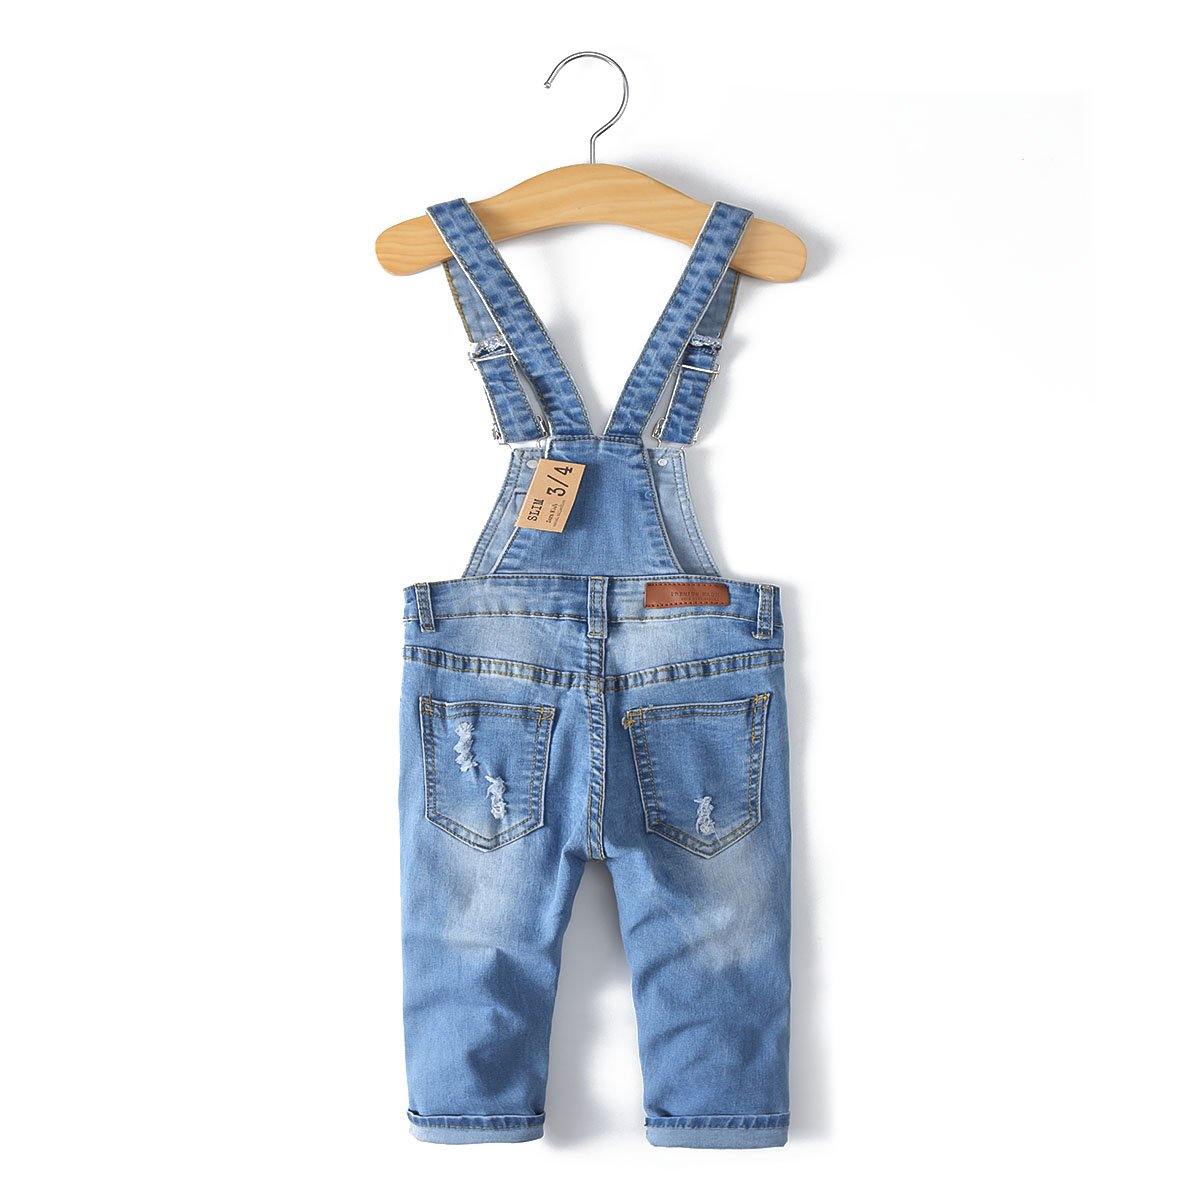 Child Ripped Holes Stretchy Stone Washed Soft Jeans Overalls - Kidscool Space